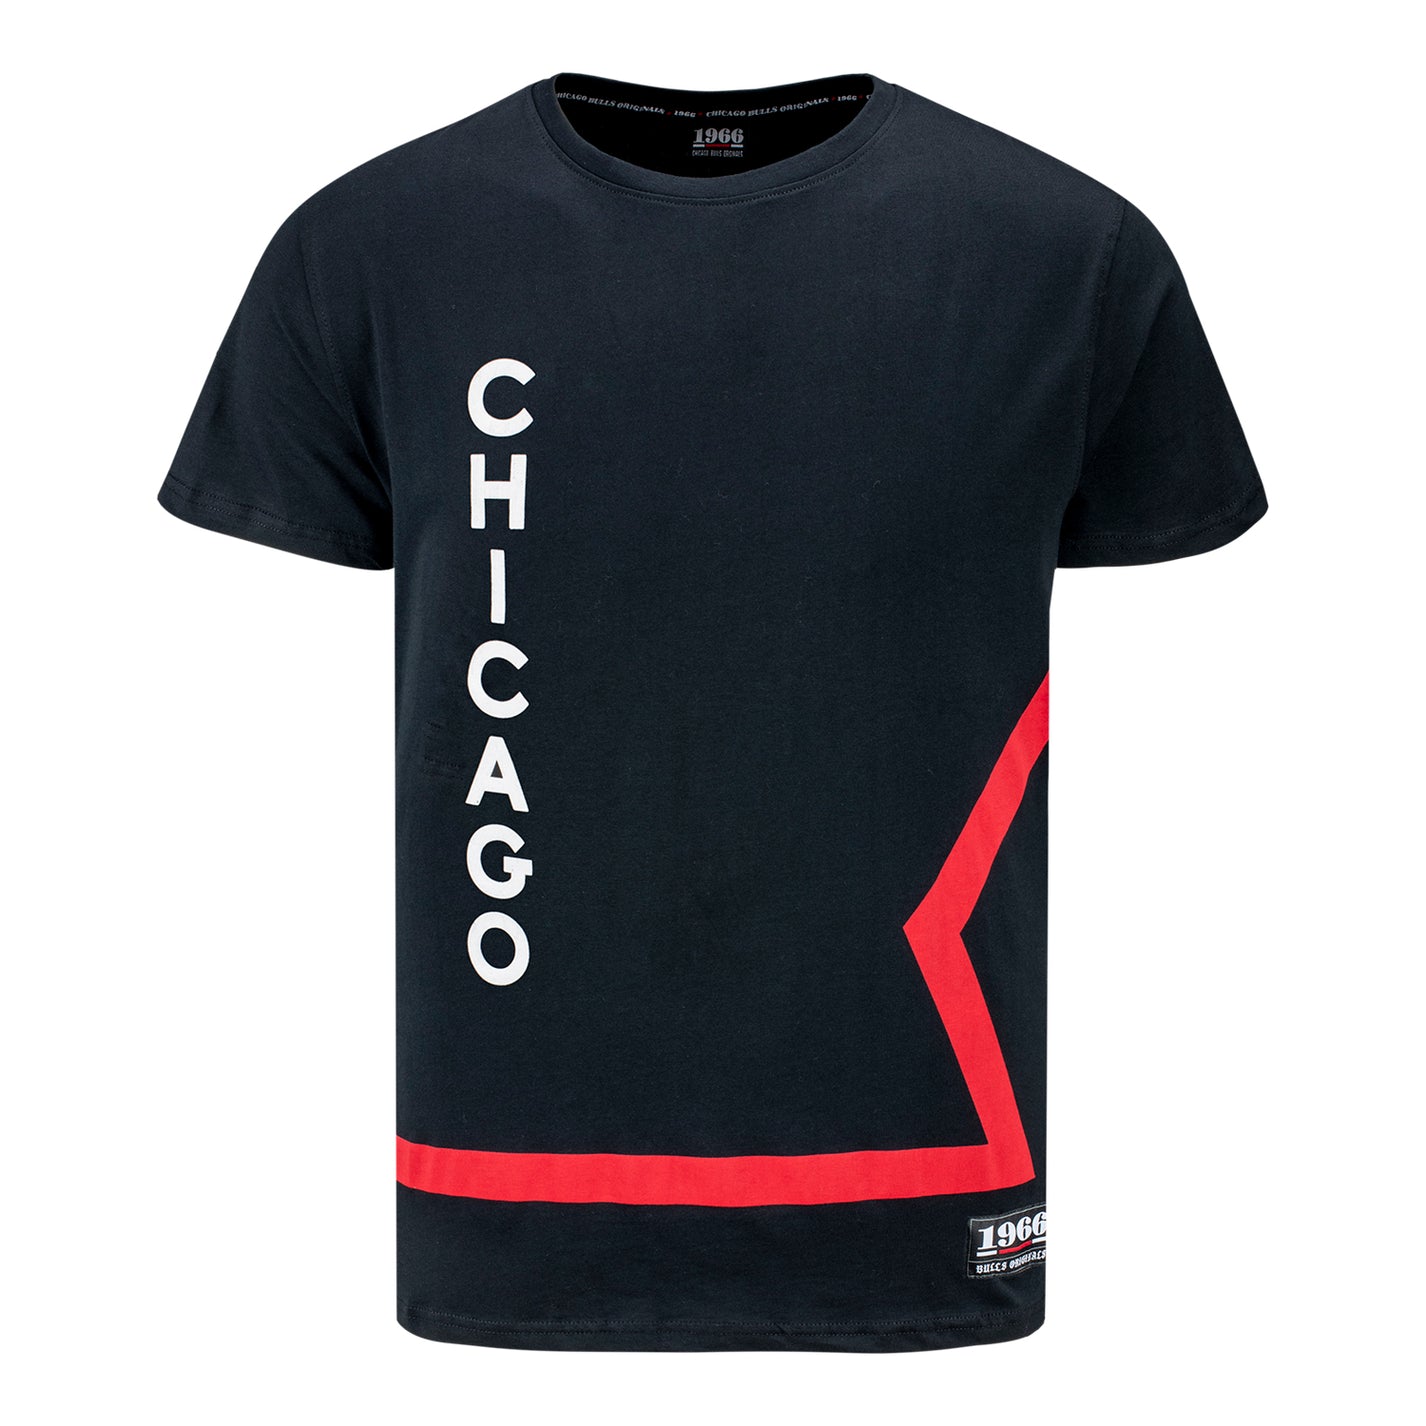 202324 CHICAGO BULLS CITY EDITION 1966 TSHIRT Official Chicago